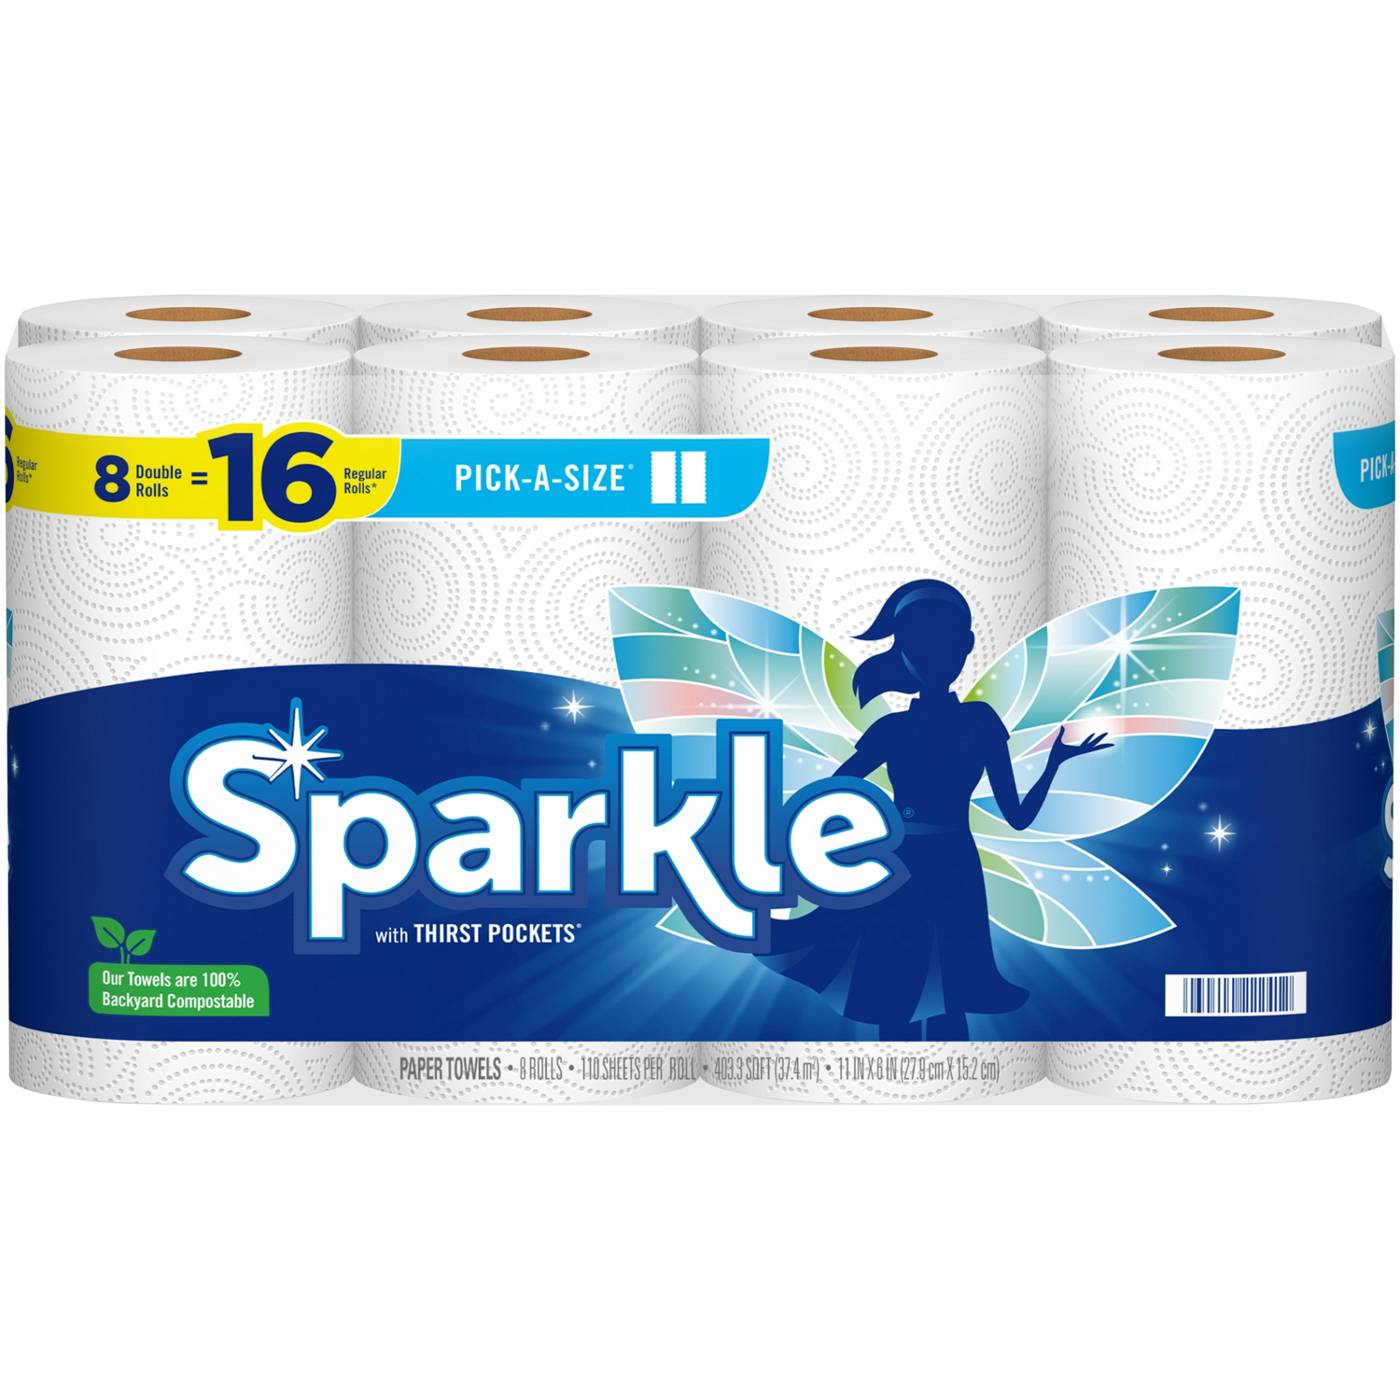 Sparkle Pick-A-Size Double Rolls Paper Towels with Thirst Pockets; image 1 of 2